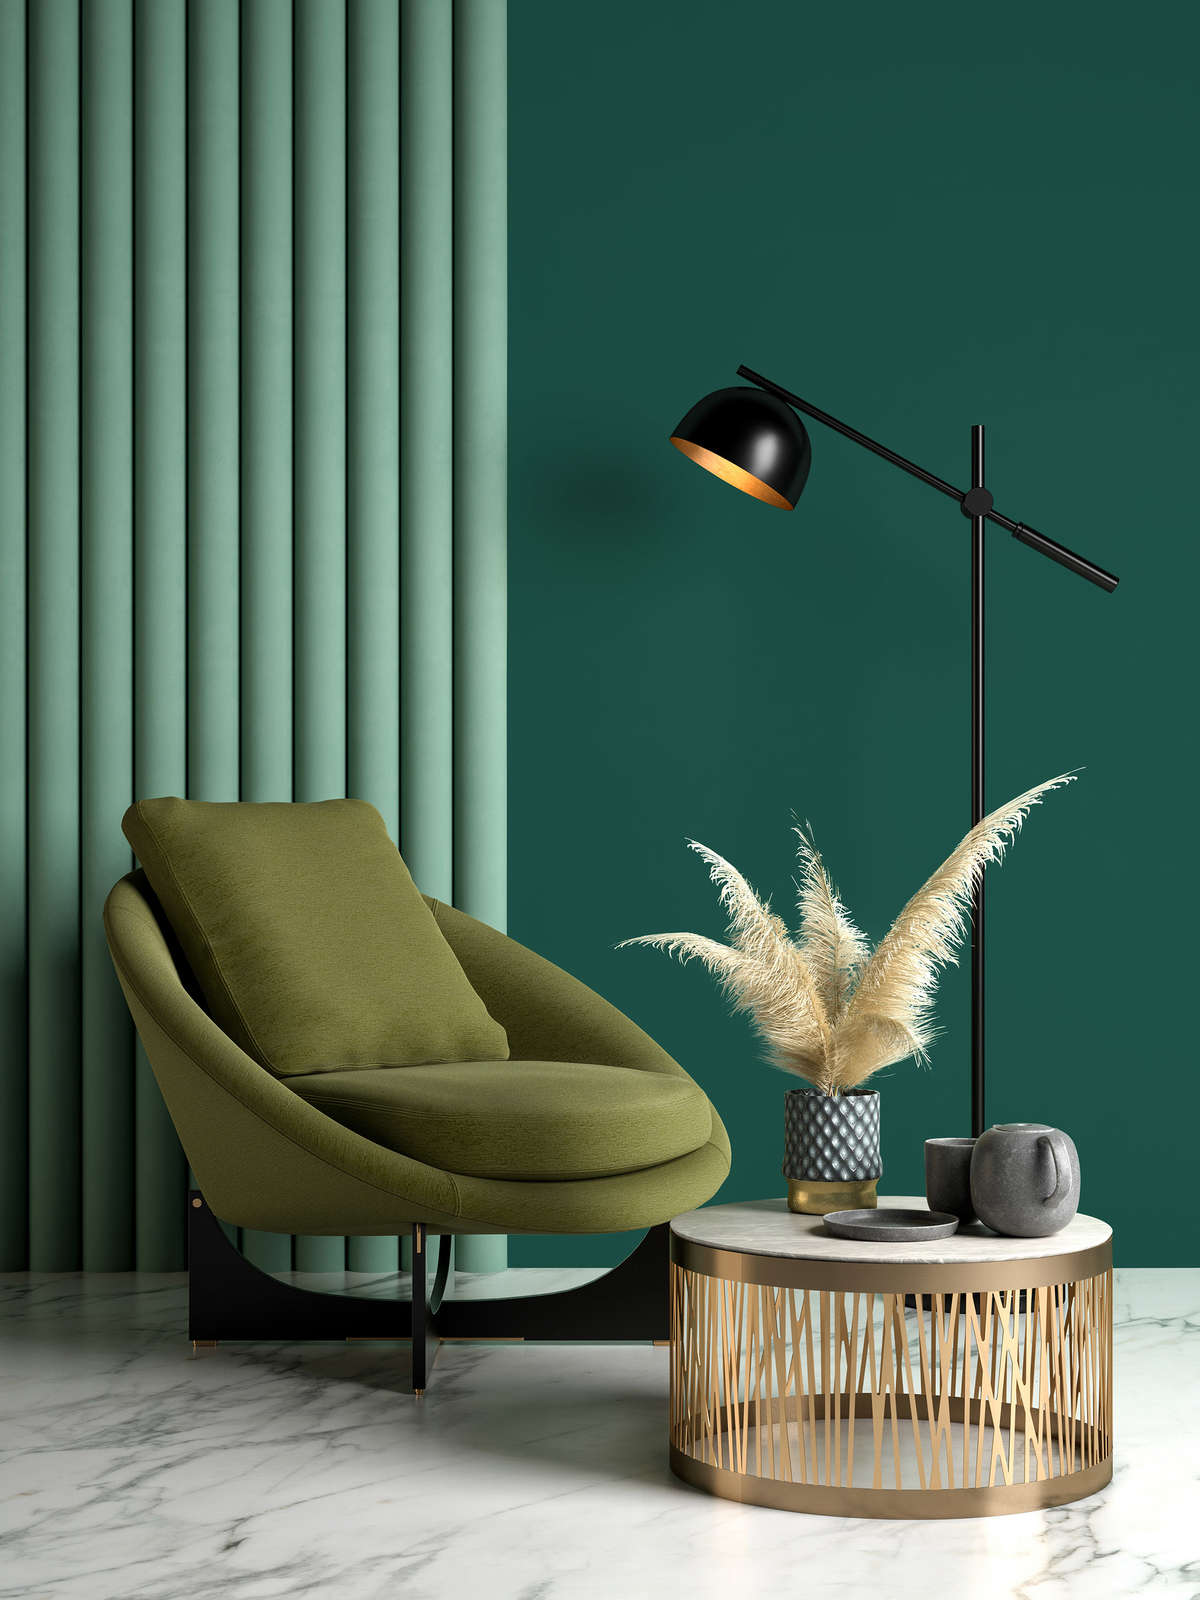             Premium Wall Paint gorgeous emerald green »Expressive Emerald« NW412 – 1 litre
        